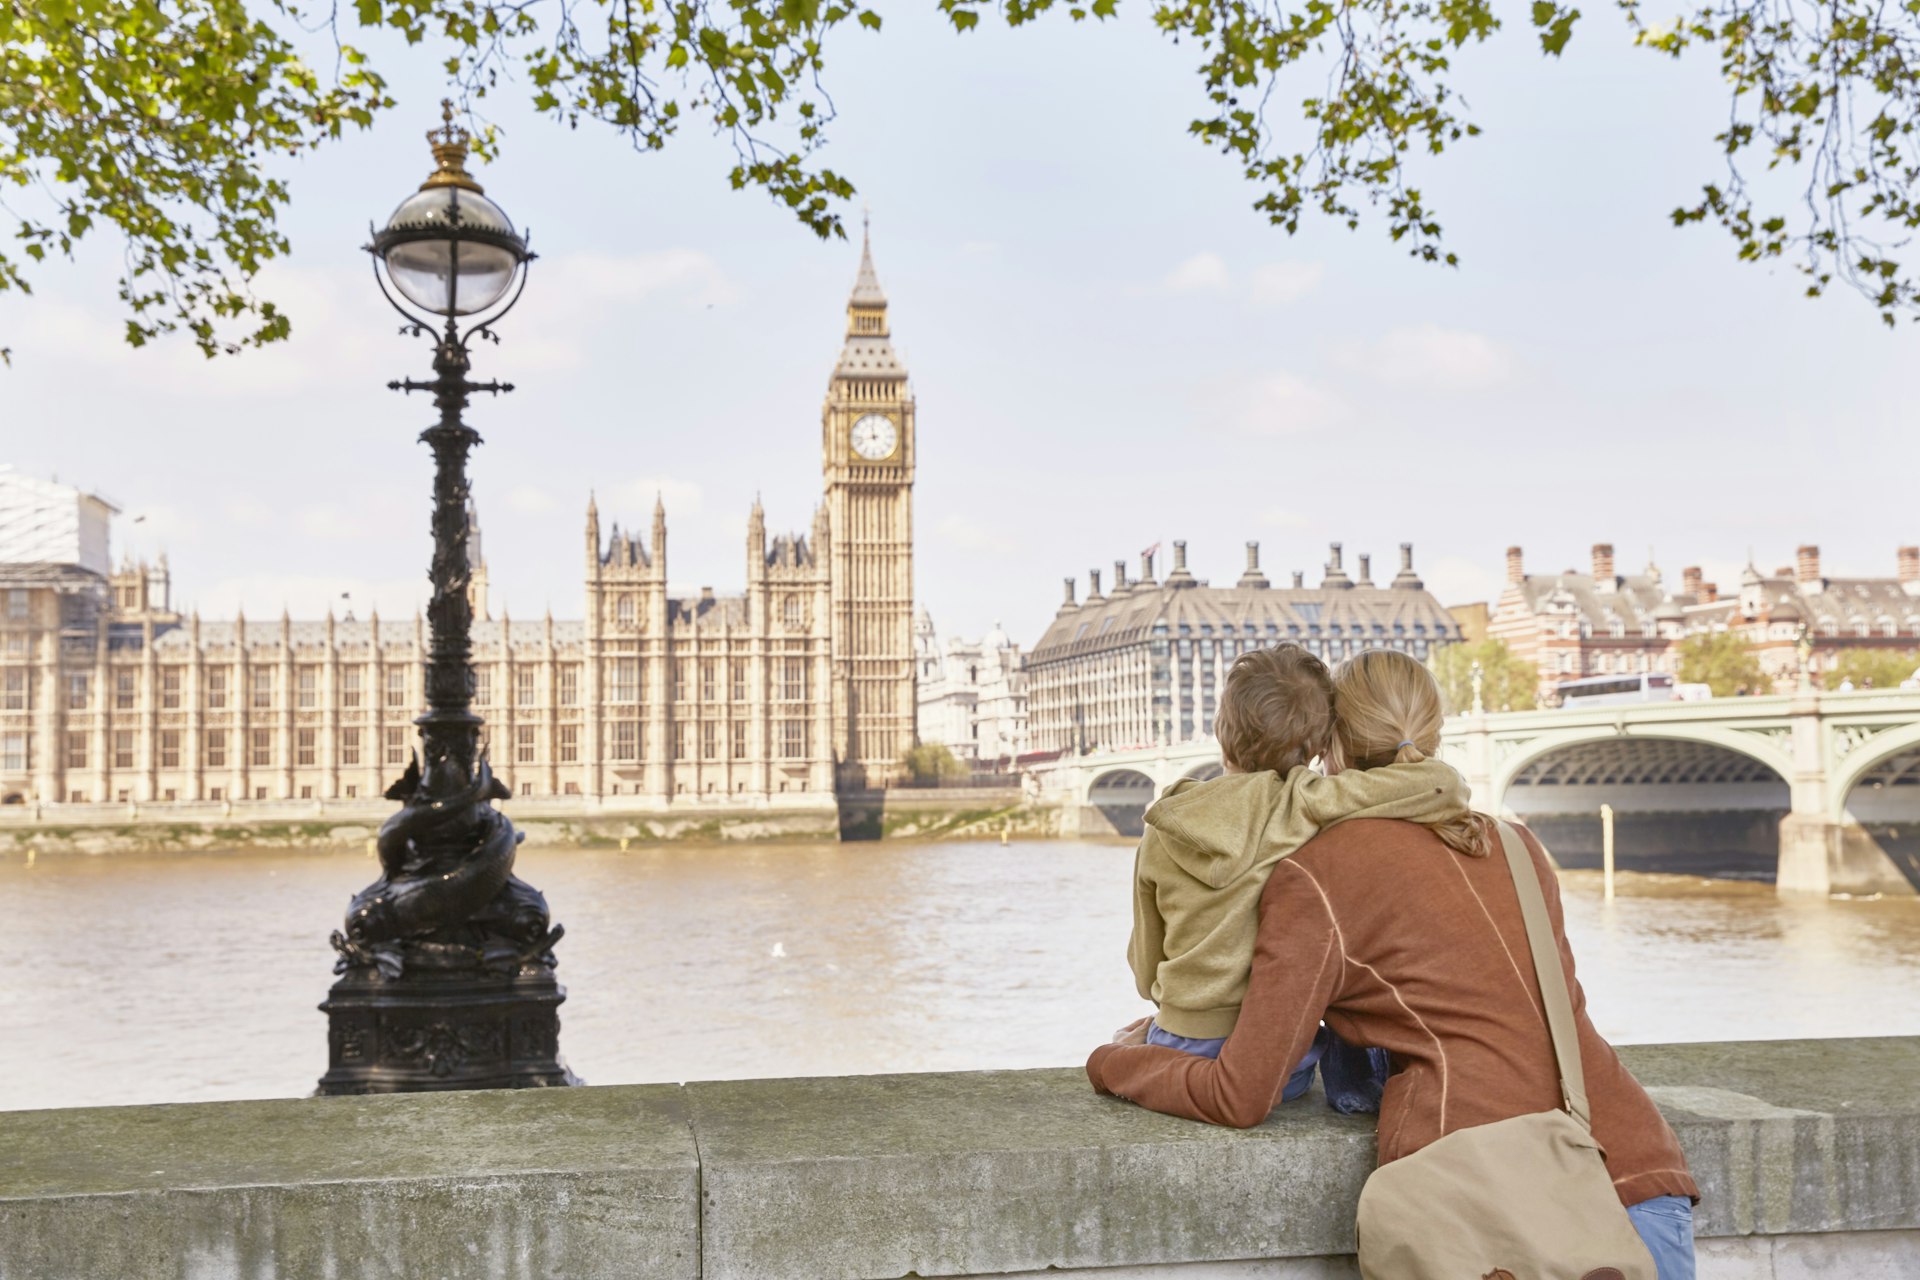 Mother and son looking over the Thames River at Big Ben and the Houses of Parliament in London